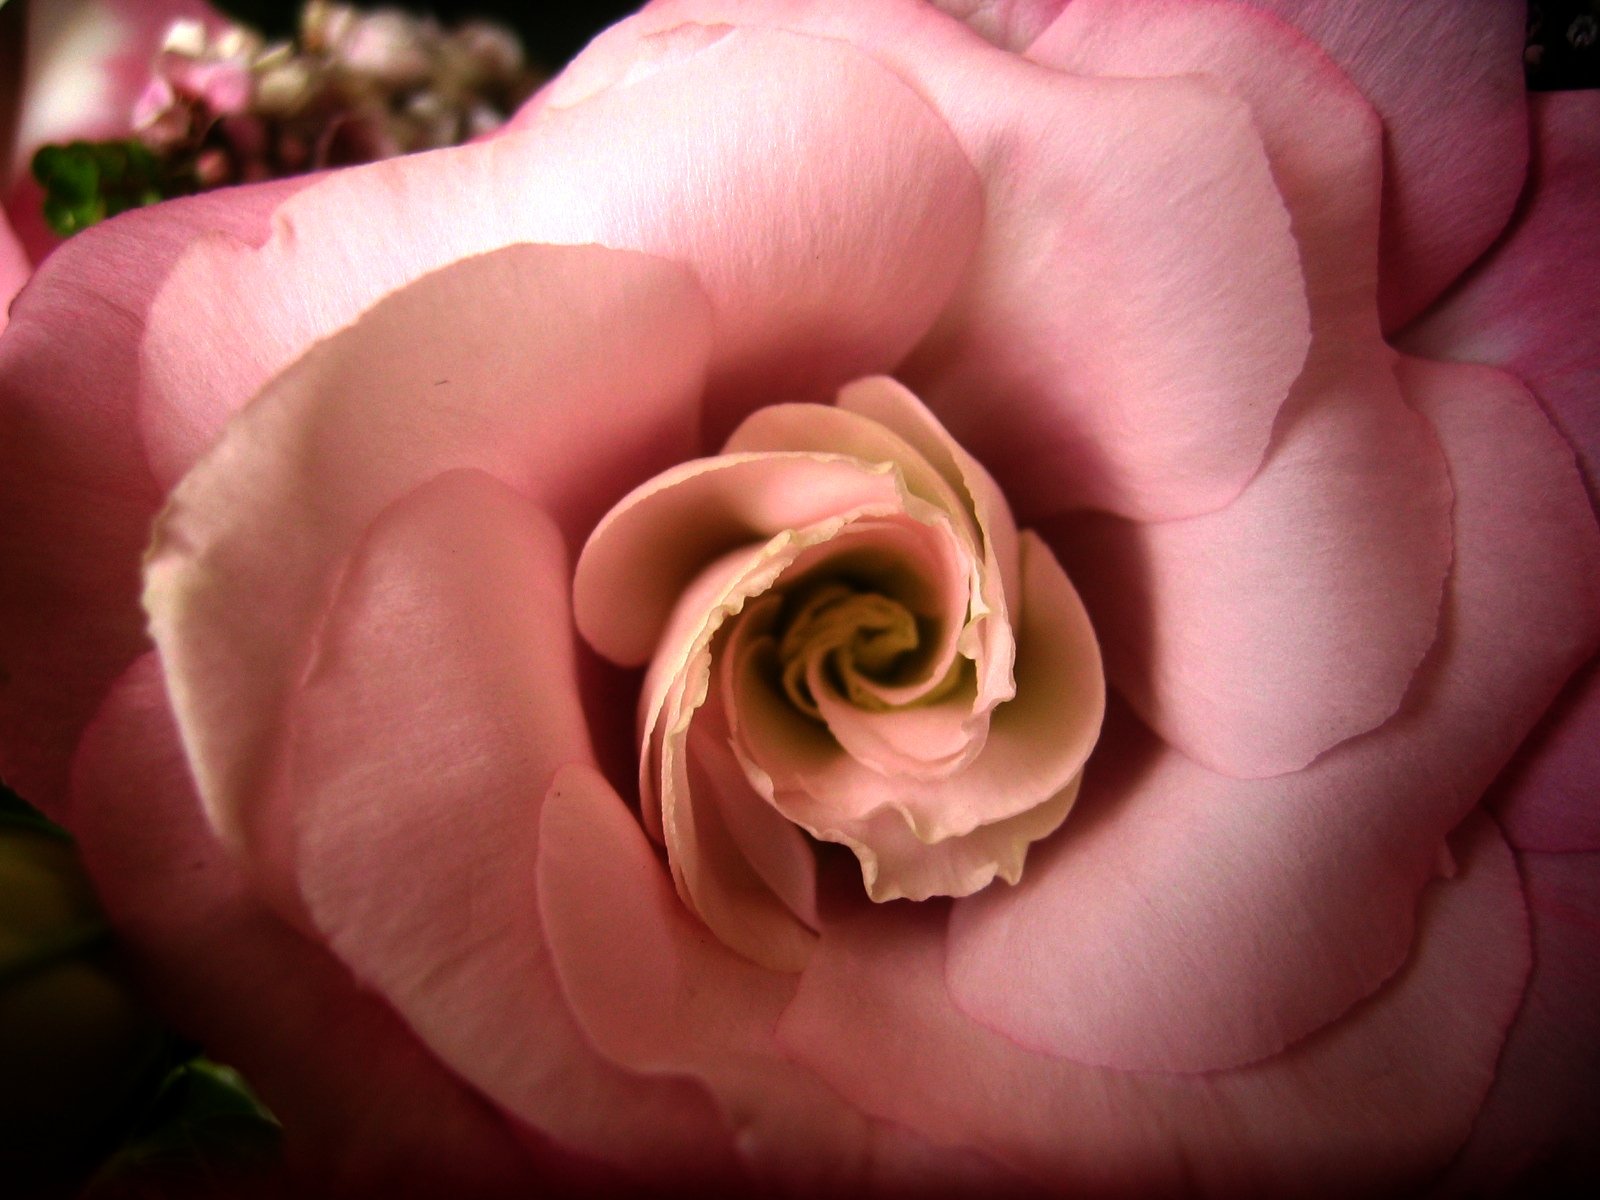 this po shows the inside of a pink rose